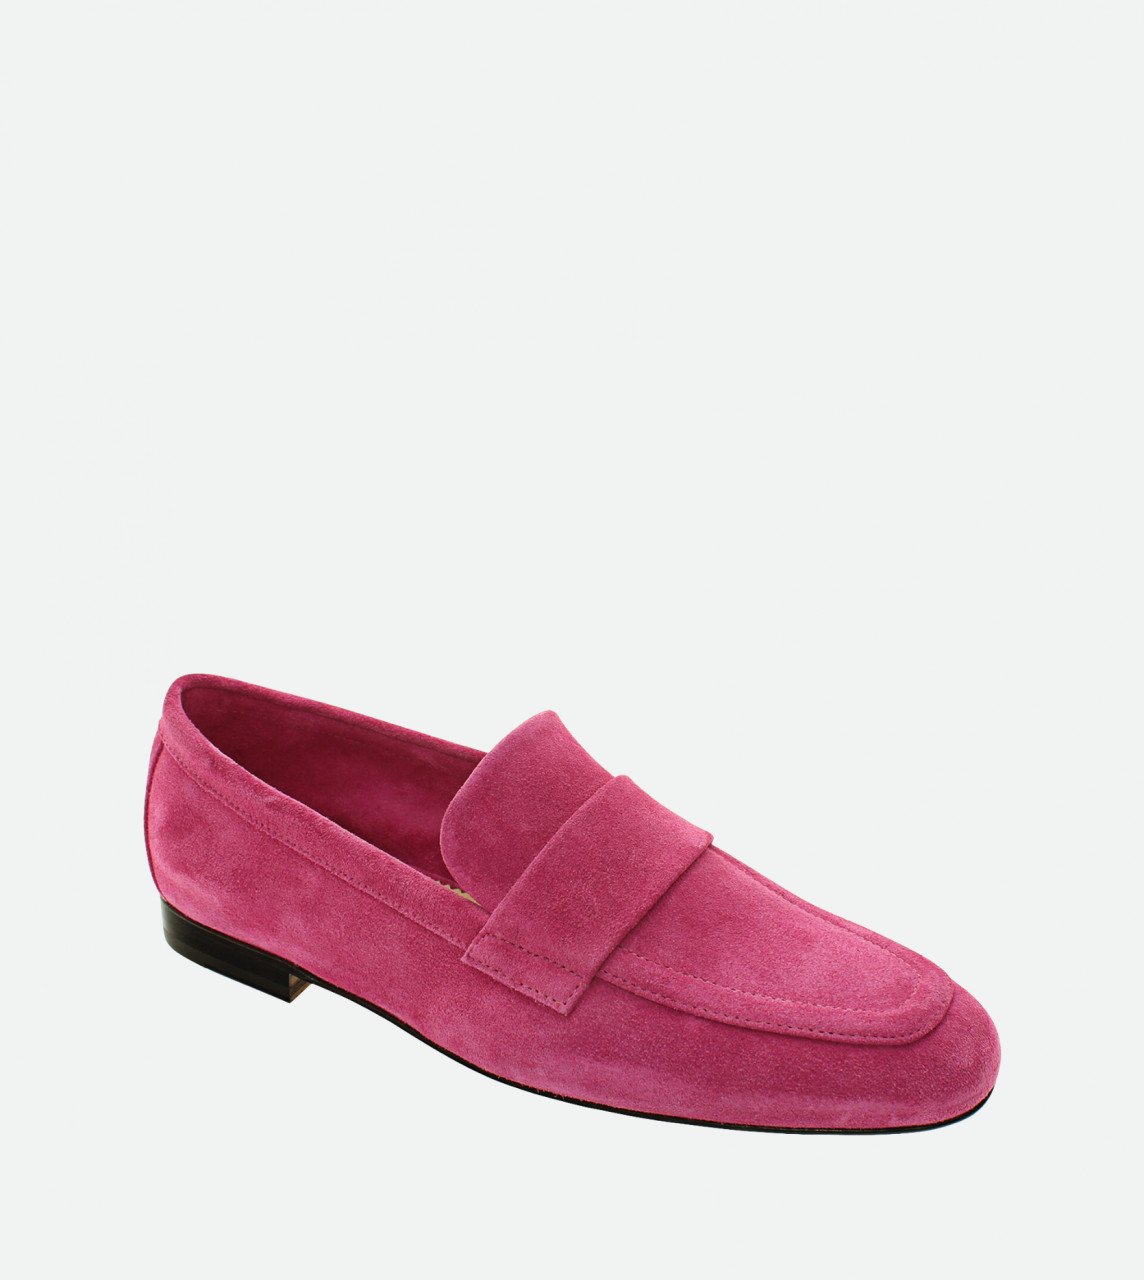 Doucal's tassel-detail leather loafers - Blue